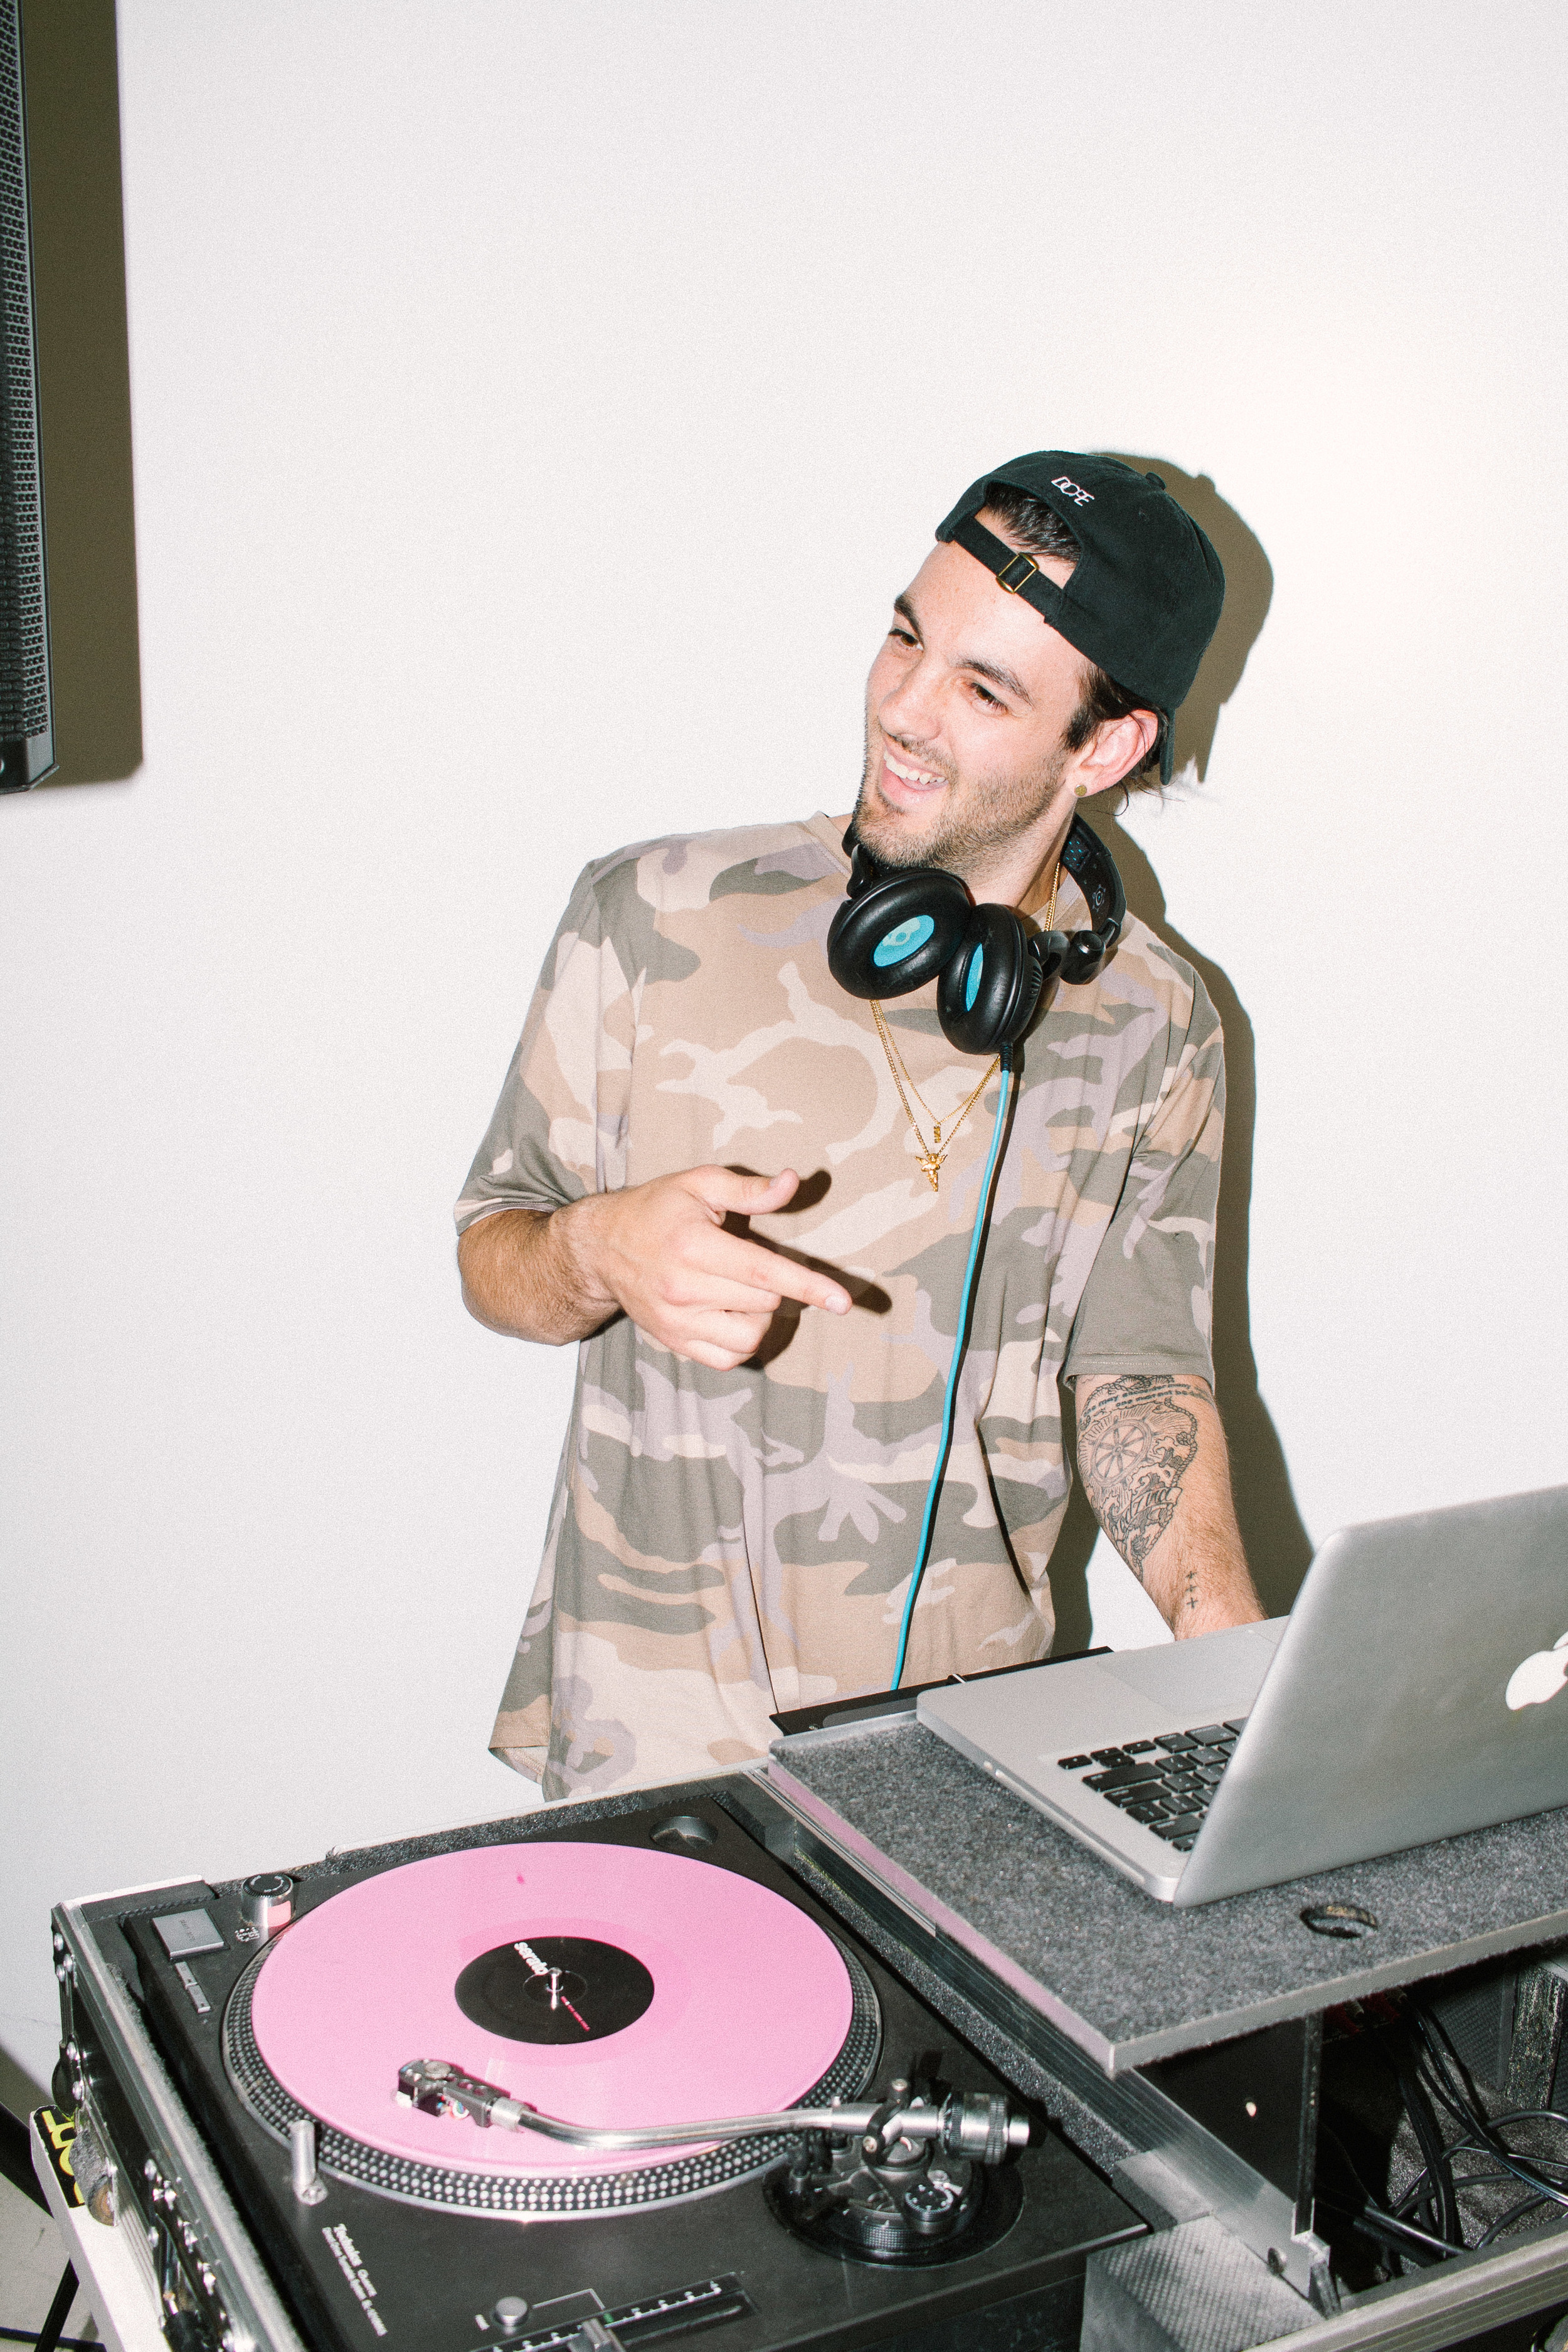  SUSPEND Presents "Dope After Hours" with DOPE x Modelo™ /&nbsp;Photo: © Devinn Campbell for DOPE® 